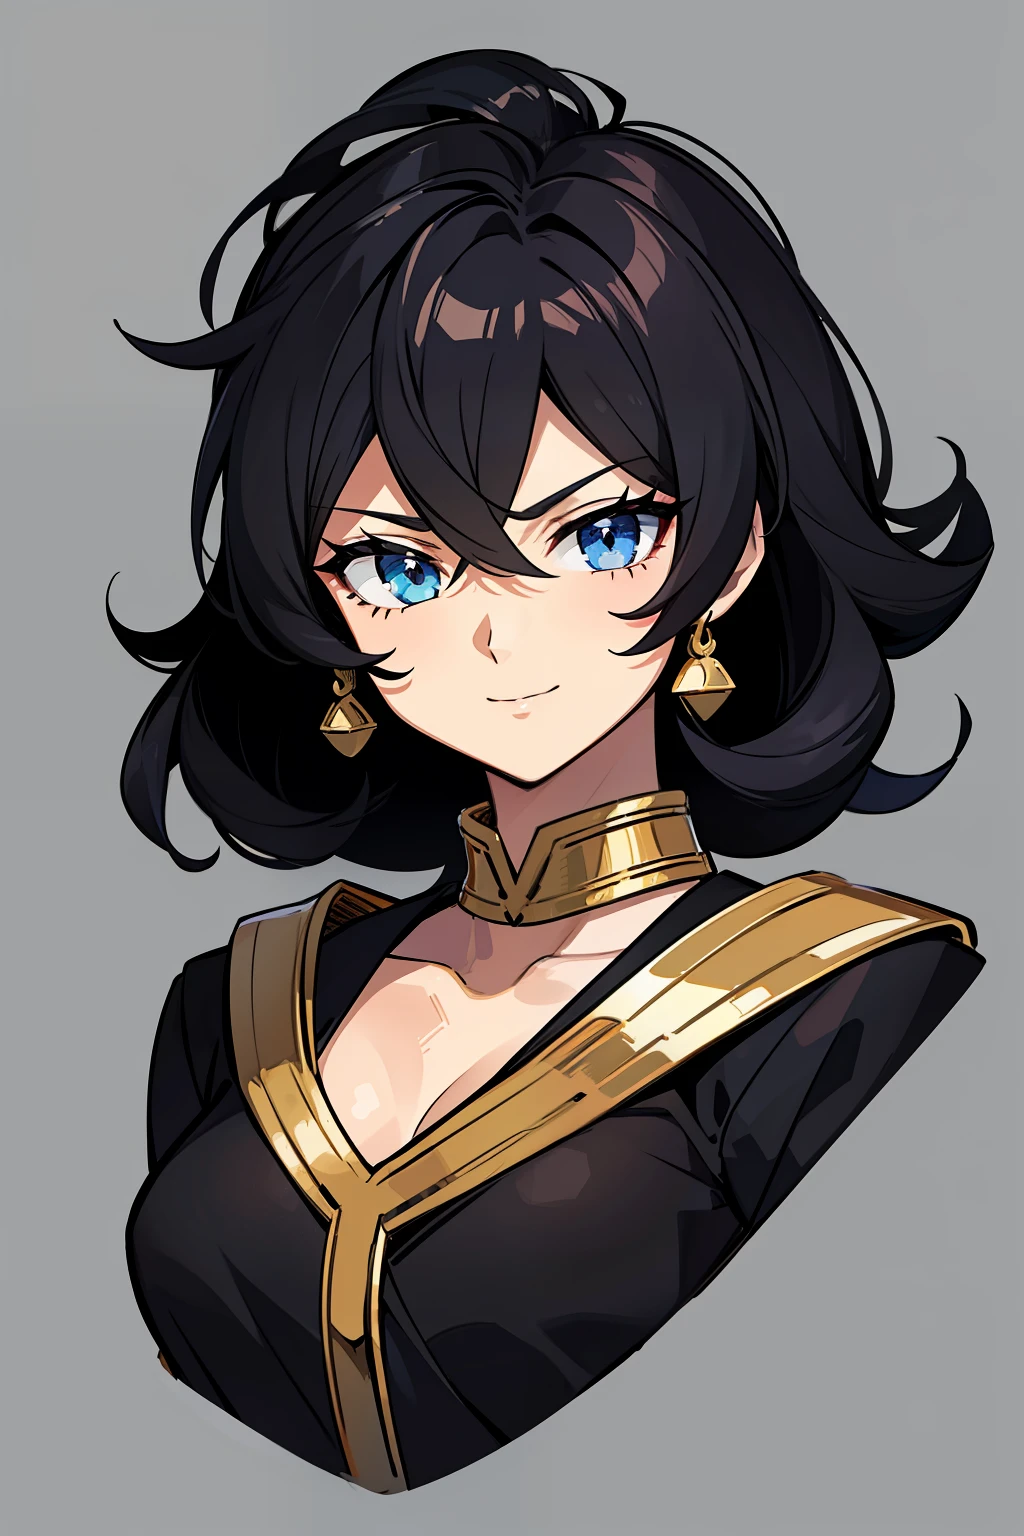 (high-quality, breathtaking),(expressive eyes, perfect face) portrait, 1girl, girl, solo, young adult, black hair, blue coloured eyes, stylised hair, gentle smile, medium length hair, loose hair, side bangs, curley hair, really spiky hair, spiked up hair, looking at viewer, portrait, ancient greek clothes, black long sleeved tunic gold trim around collar edges and down middle, greek, red and gold sash, simple background, slightly narrow eyes, baby face, , happy expression, clothes similar to Hypnos Saint Seiya, clothes similar to Alone Saint Seiya, C cup size breasts